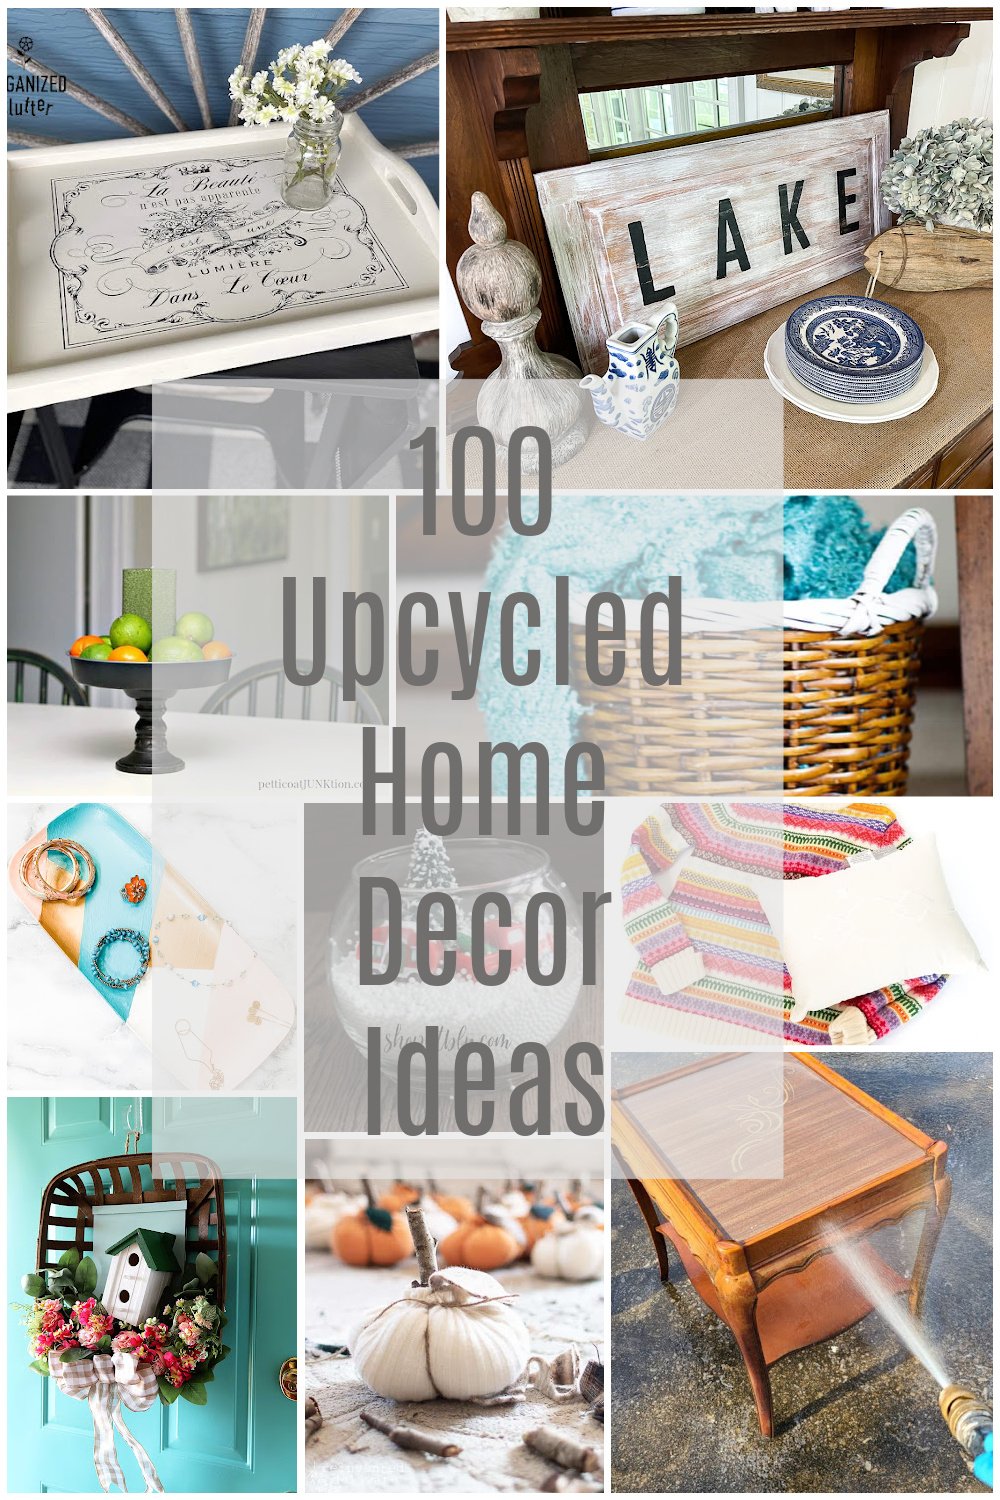 Upcycled Home Decor using thrift store items. 100 easy projects with directions and tips from 10 DIY bloggers. Something for everyone. #MyRepurposedLife #repurposed #upcycled #homedecor #thrifty via @repurposedlife